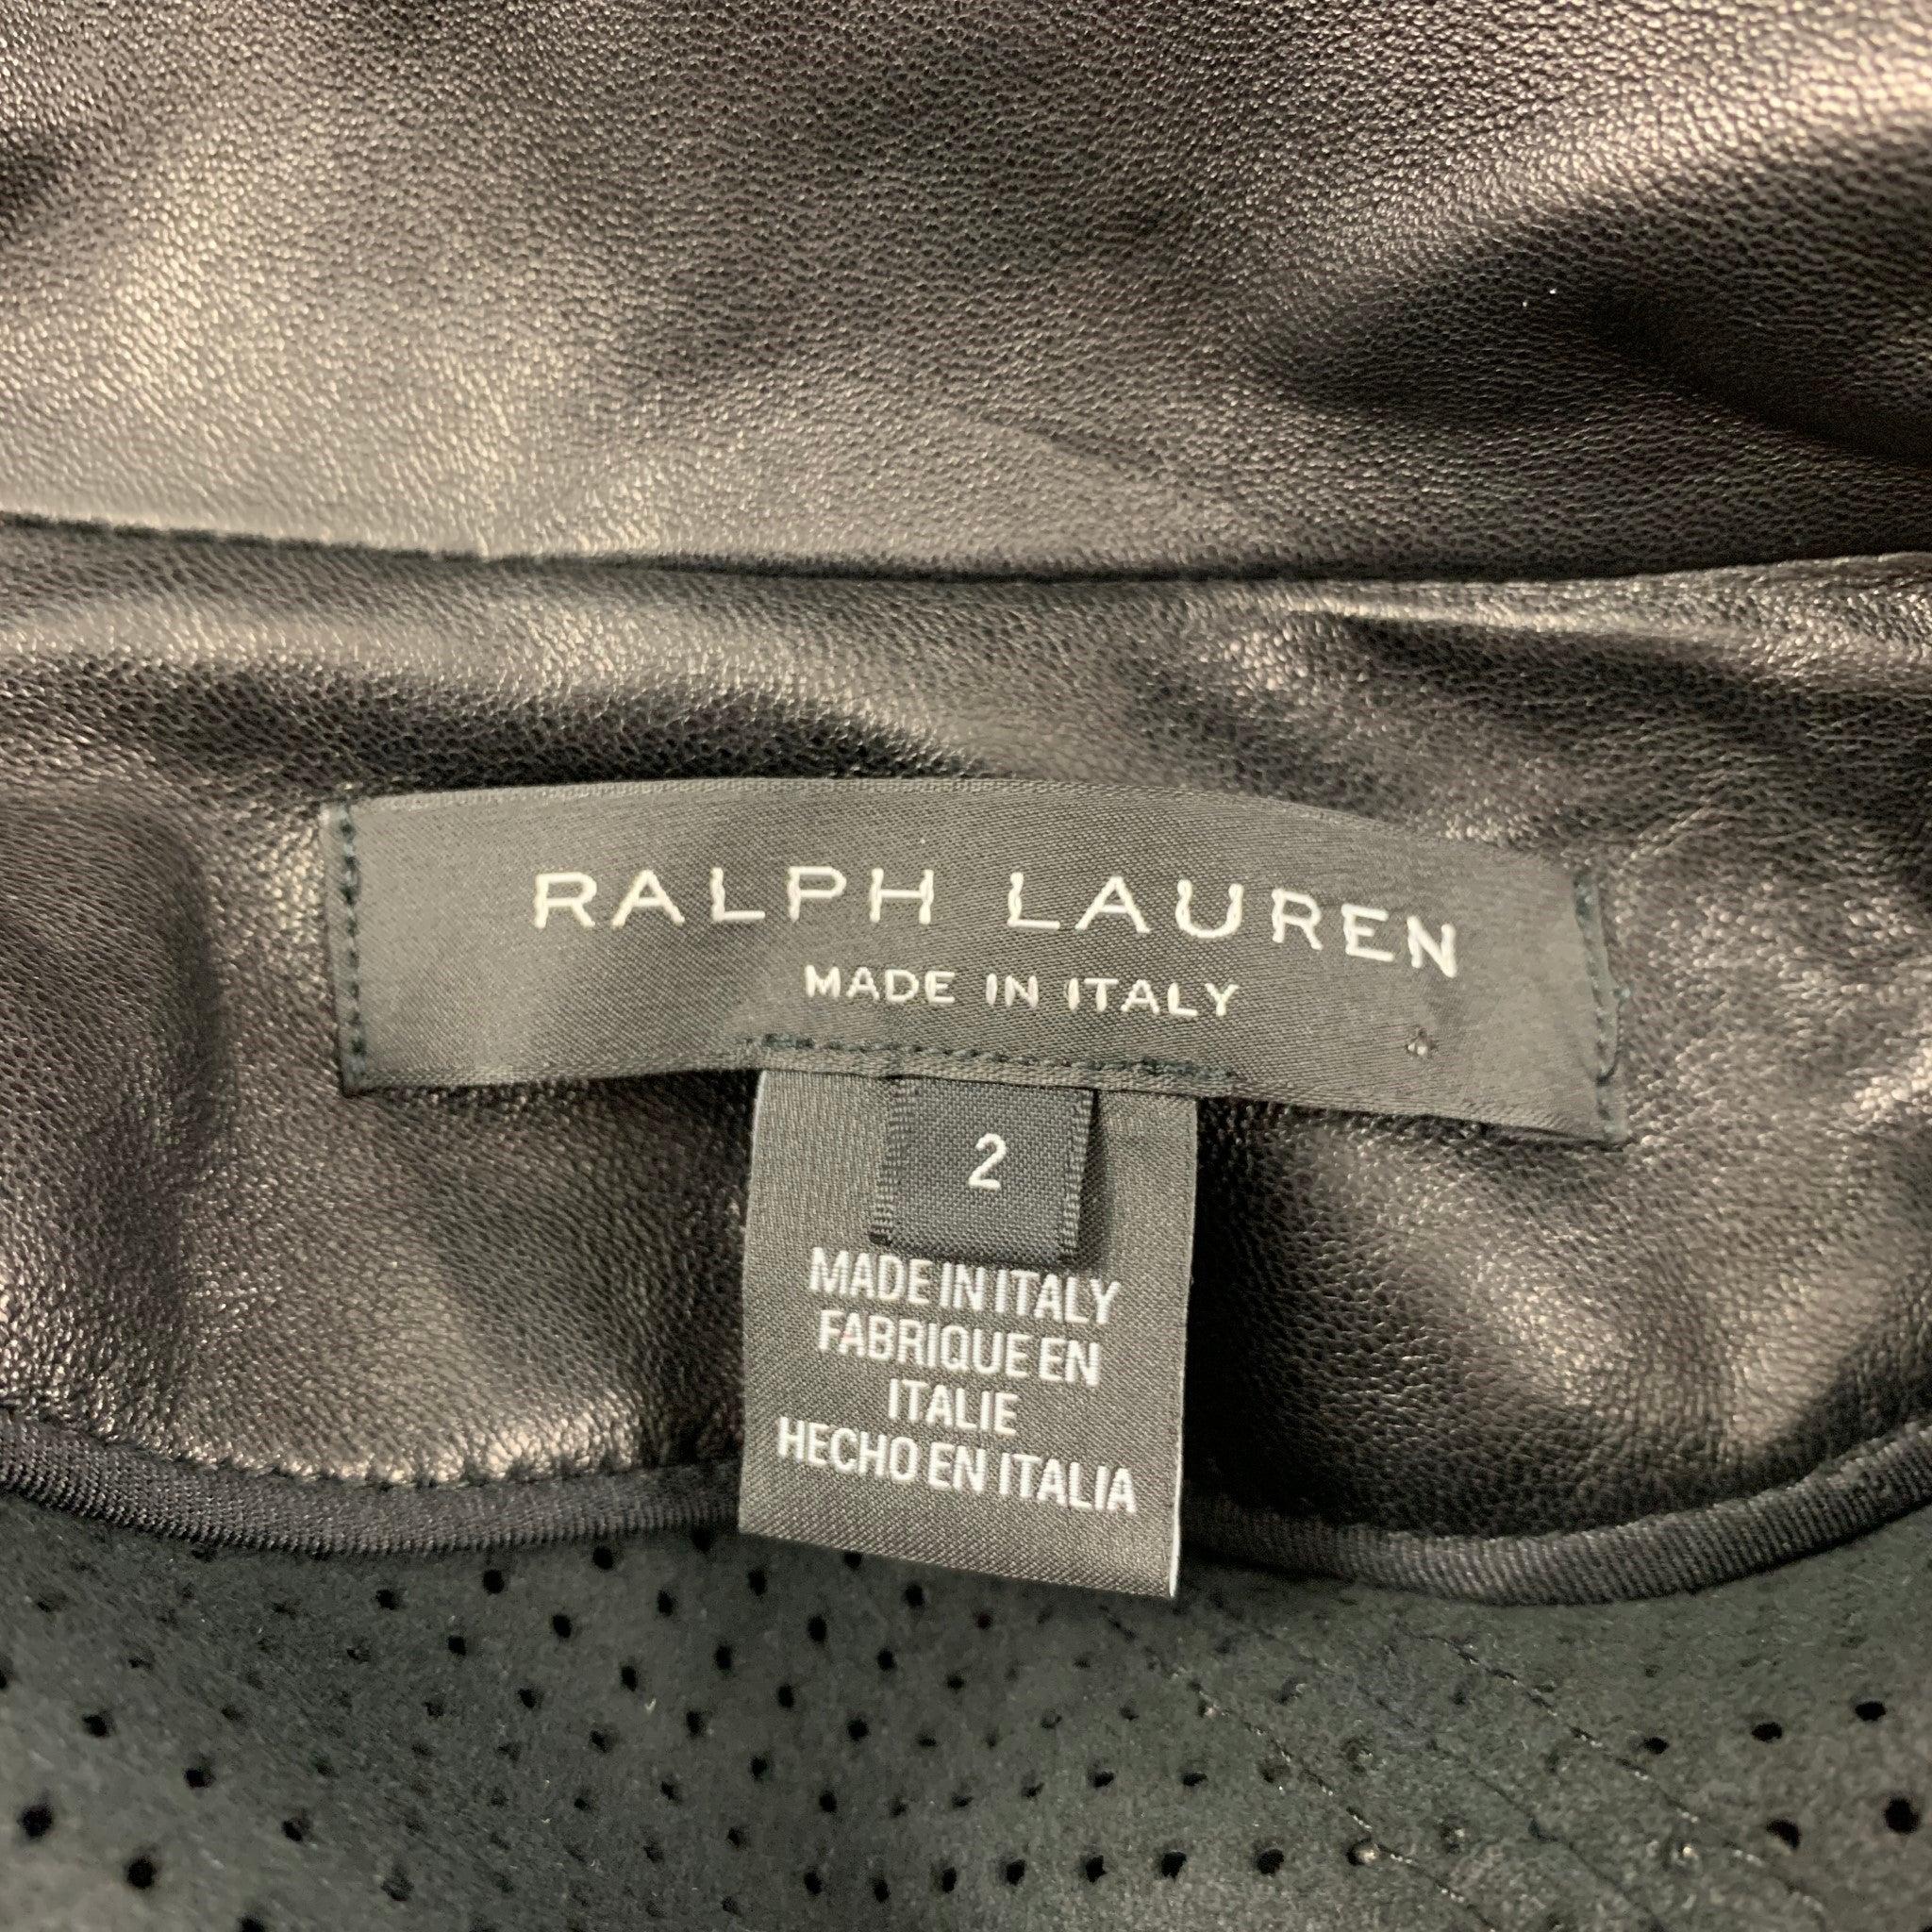 RALPH LAUREN Black Label Size 2 Black Leather Perforated Lambskin Jacket For Sale 3